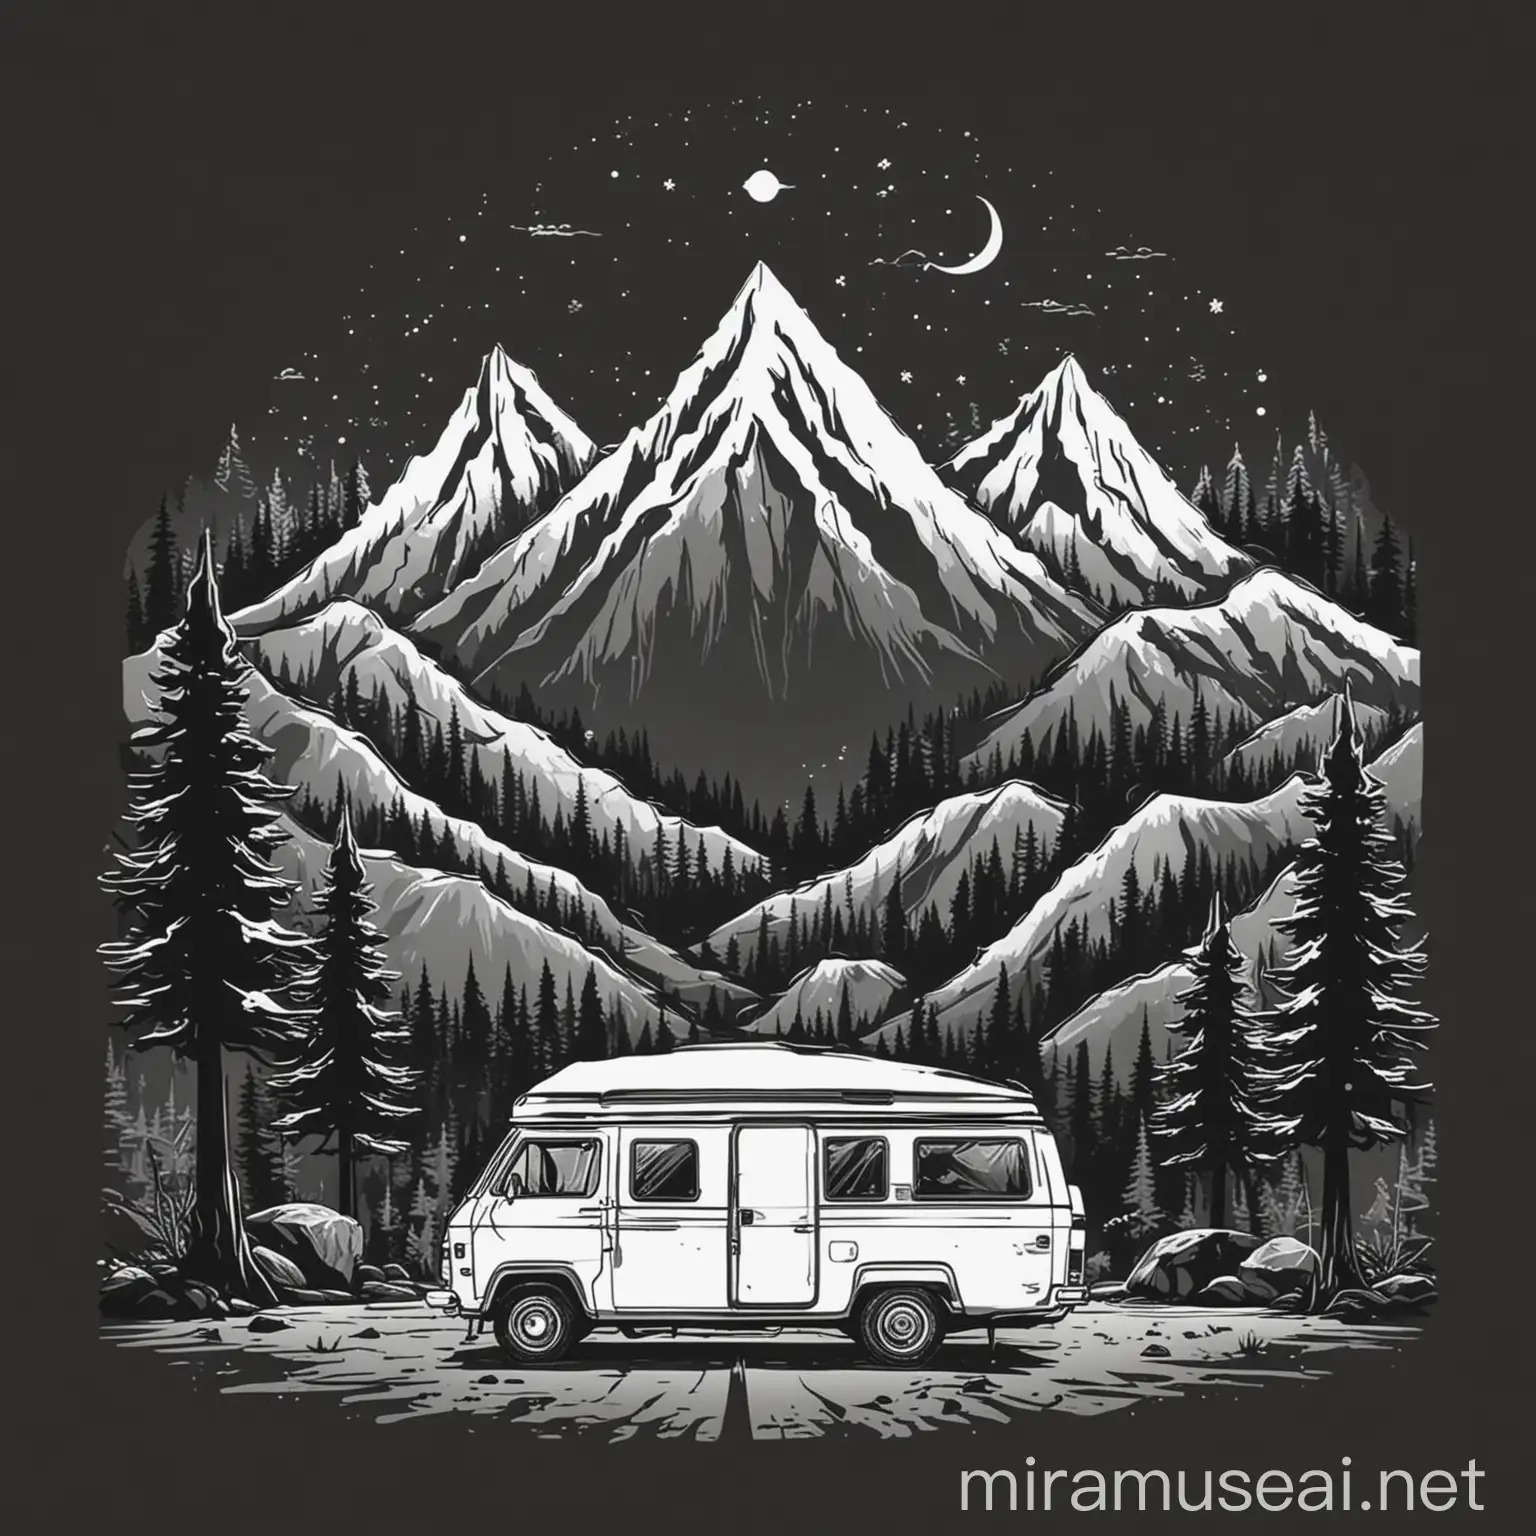 black and white very simple ilustration with tent, mountains, tree, vanlife, camper, traverl, vector graphic. contur only, funy, natural and text van life 